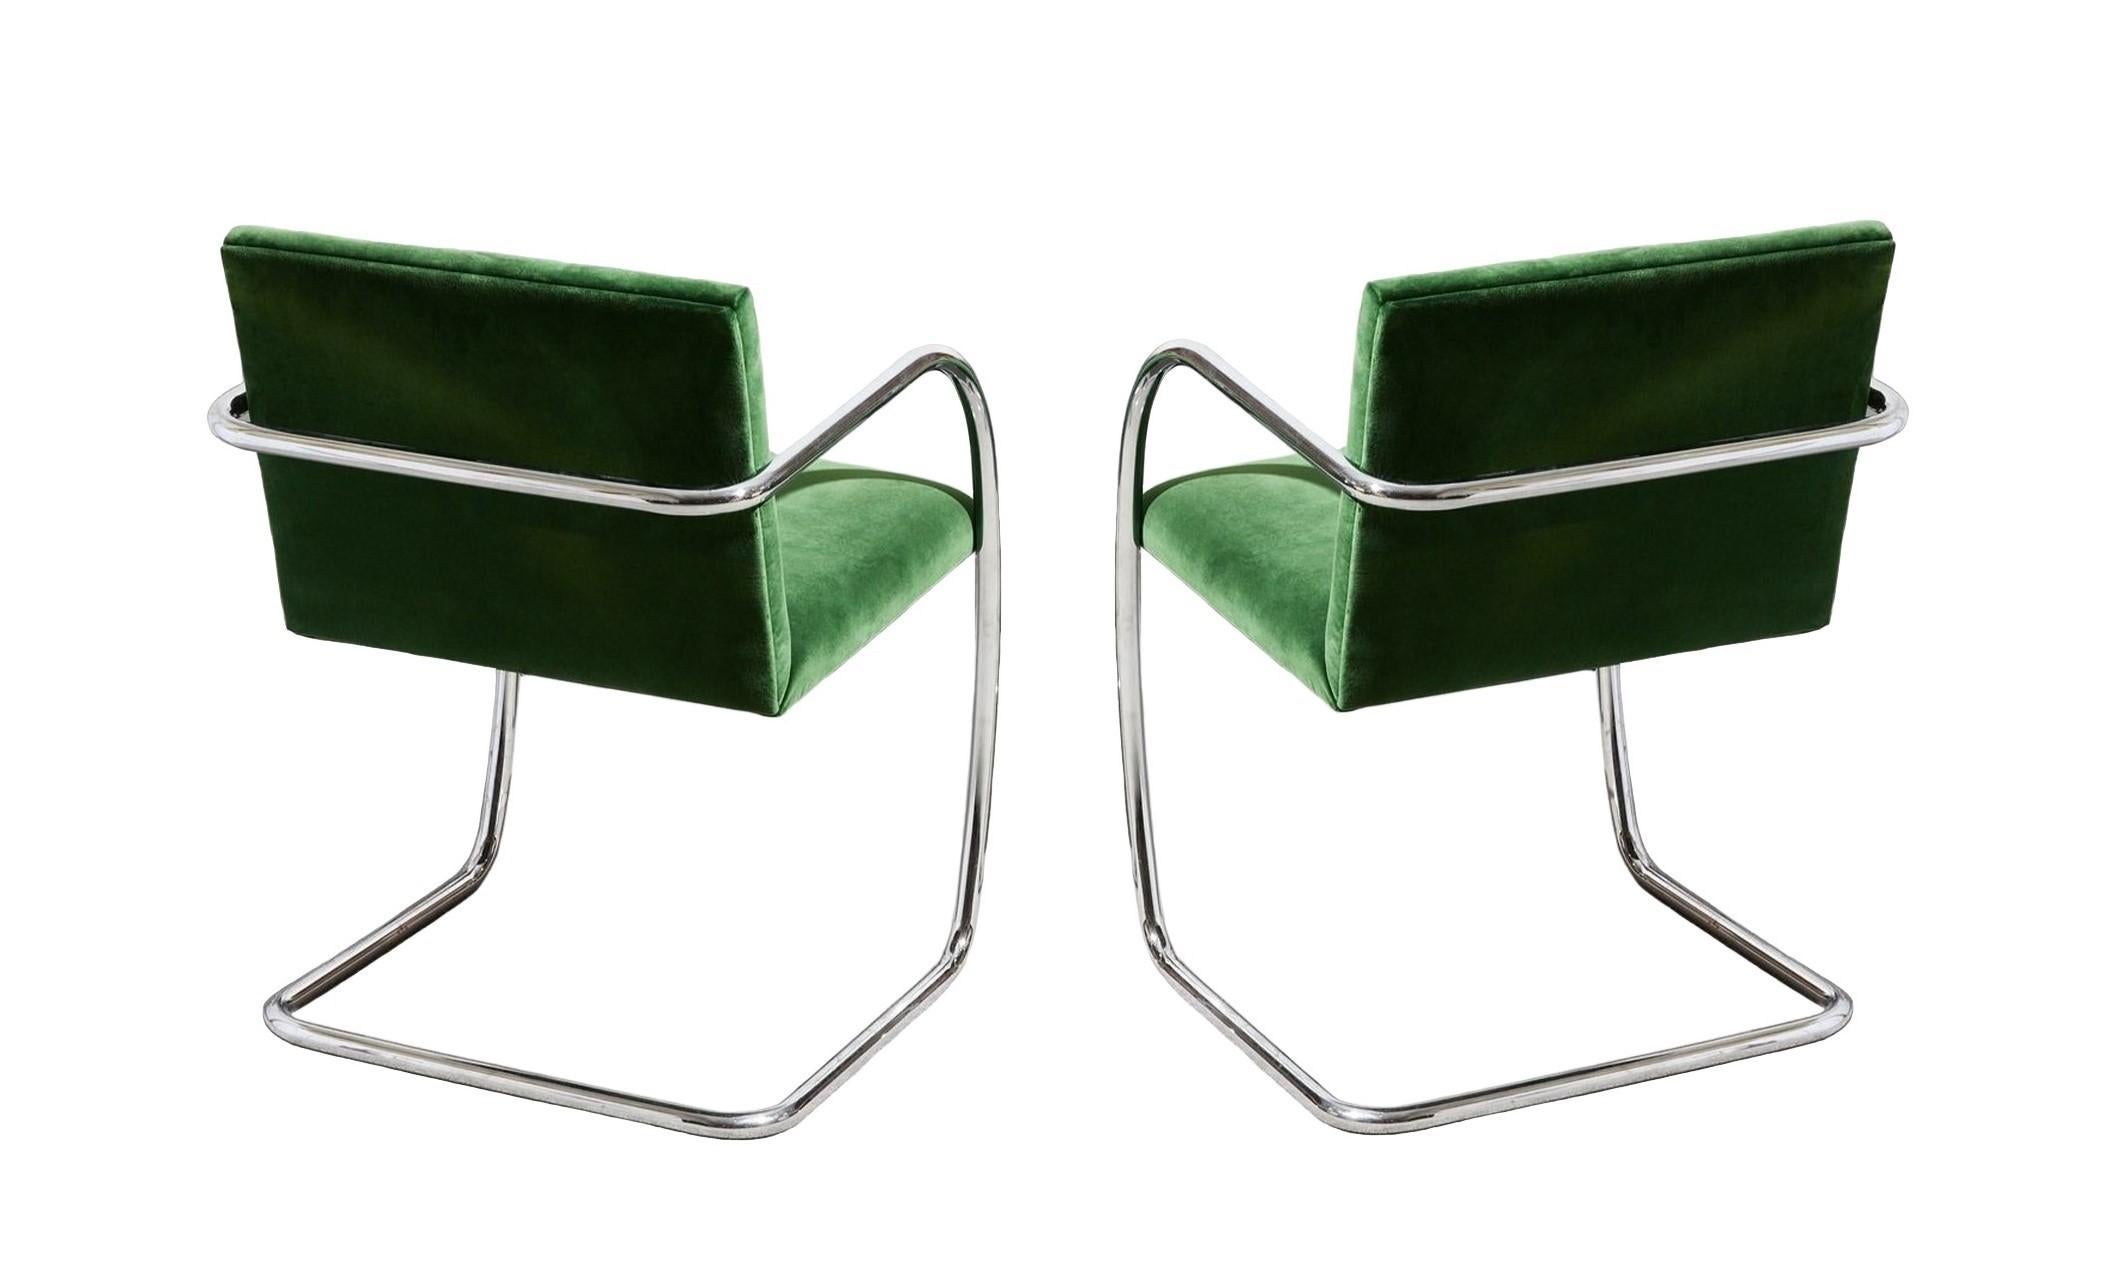 Eight Chrome Mies van der Rohe Tubular Brno Chairs by Knoll in Green Velvet In Good Condition For Sale In Dallas, TX